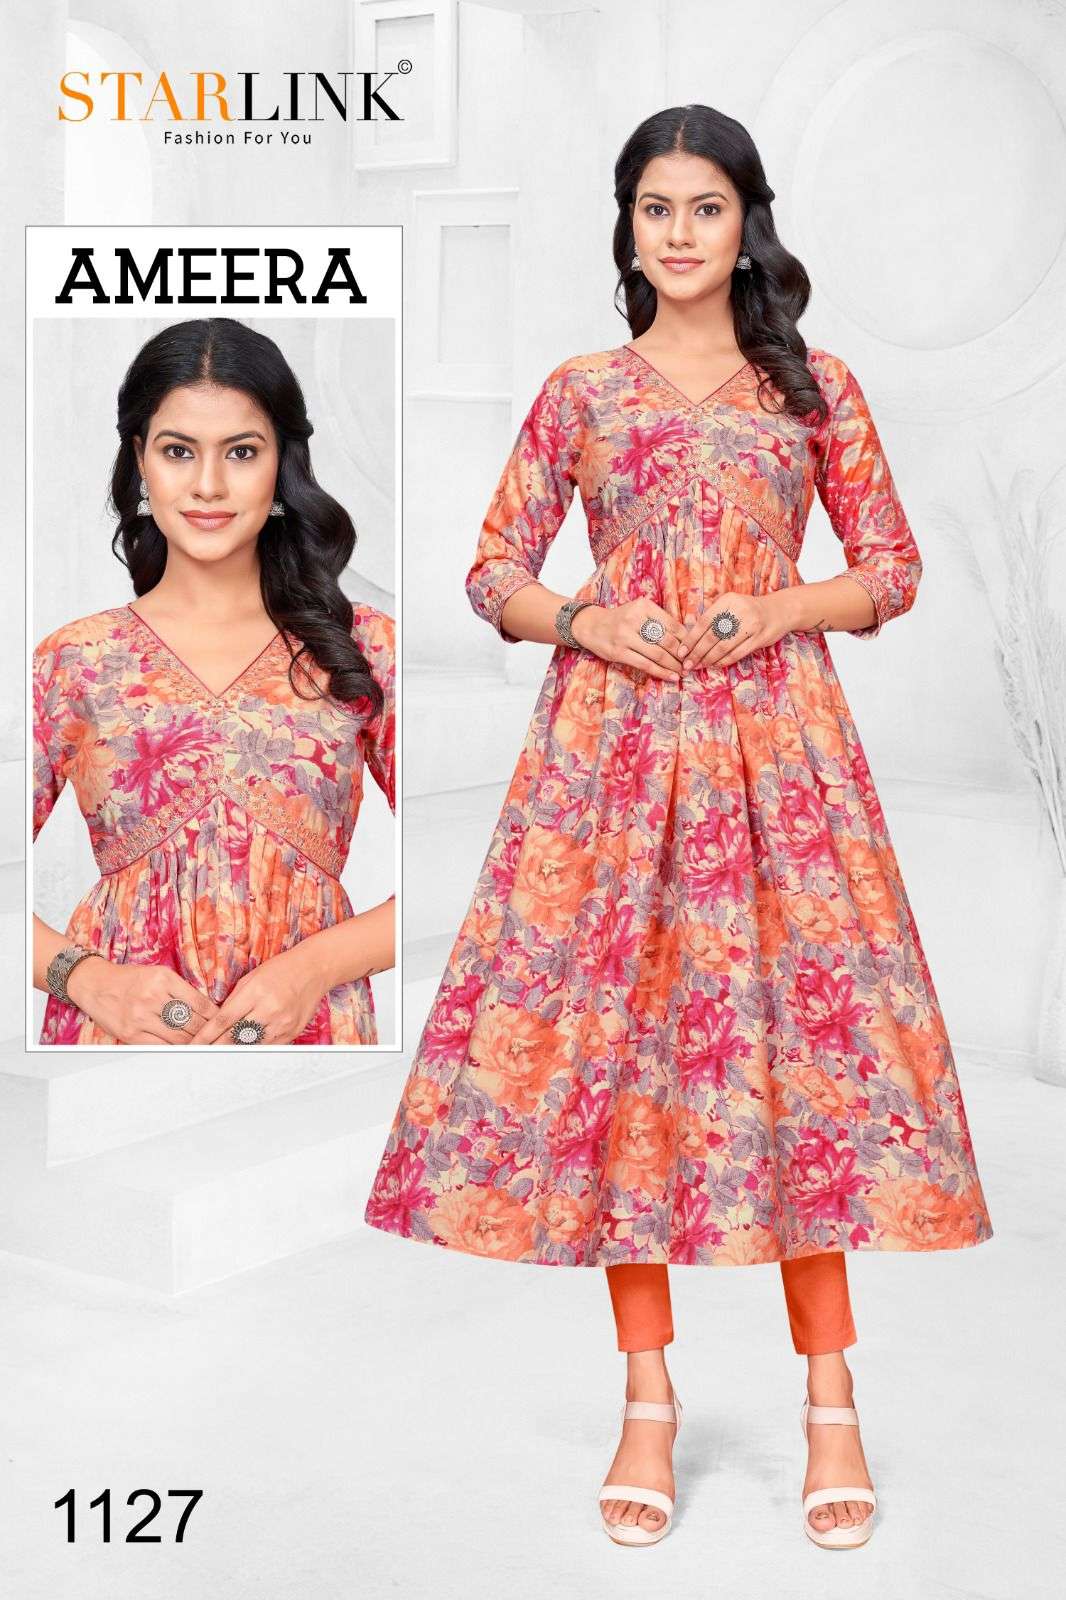 starlink ameera 2 new heavy fancy designer modal silk foil with embrodiey work alia cut flair kurti festival wear collection wholesaler 2023 08 26 12 17 27